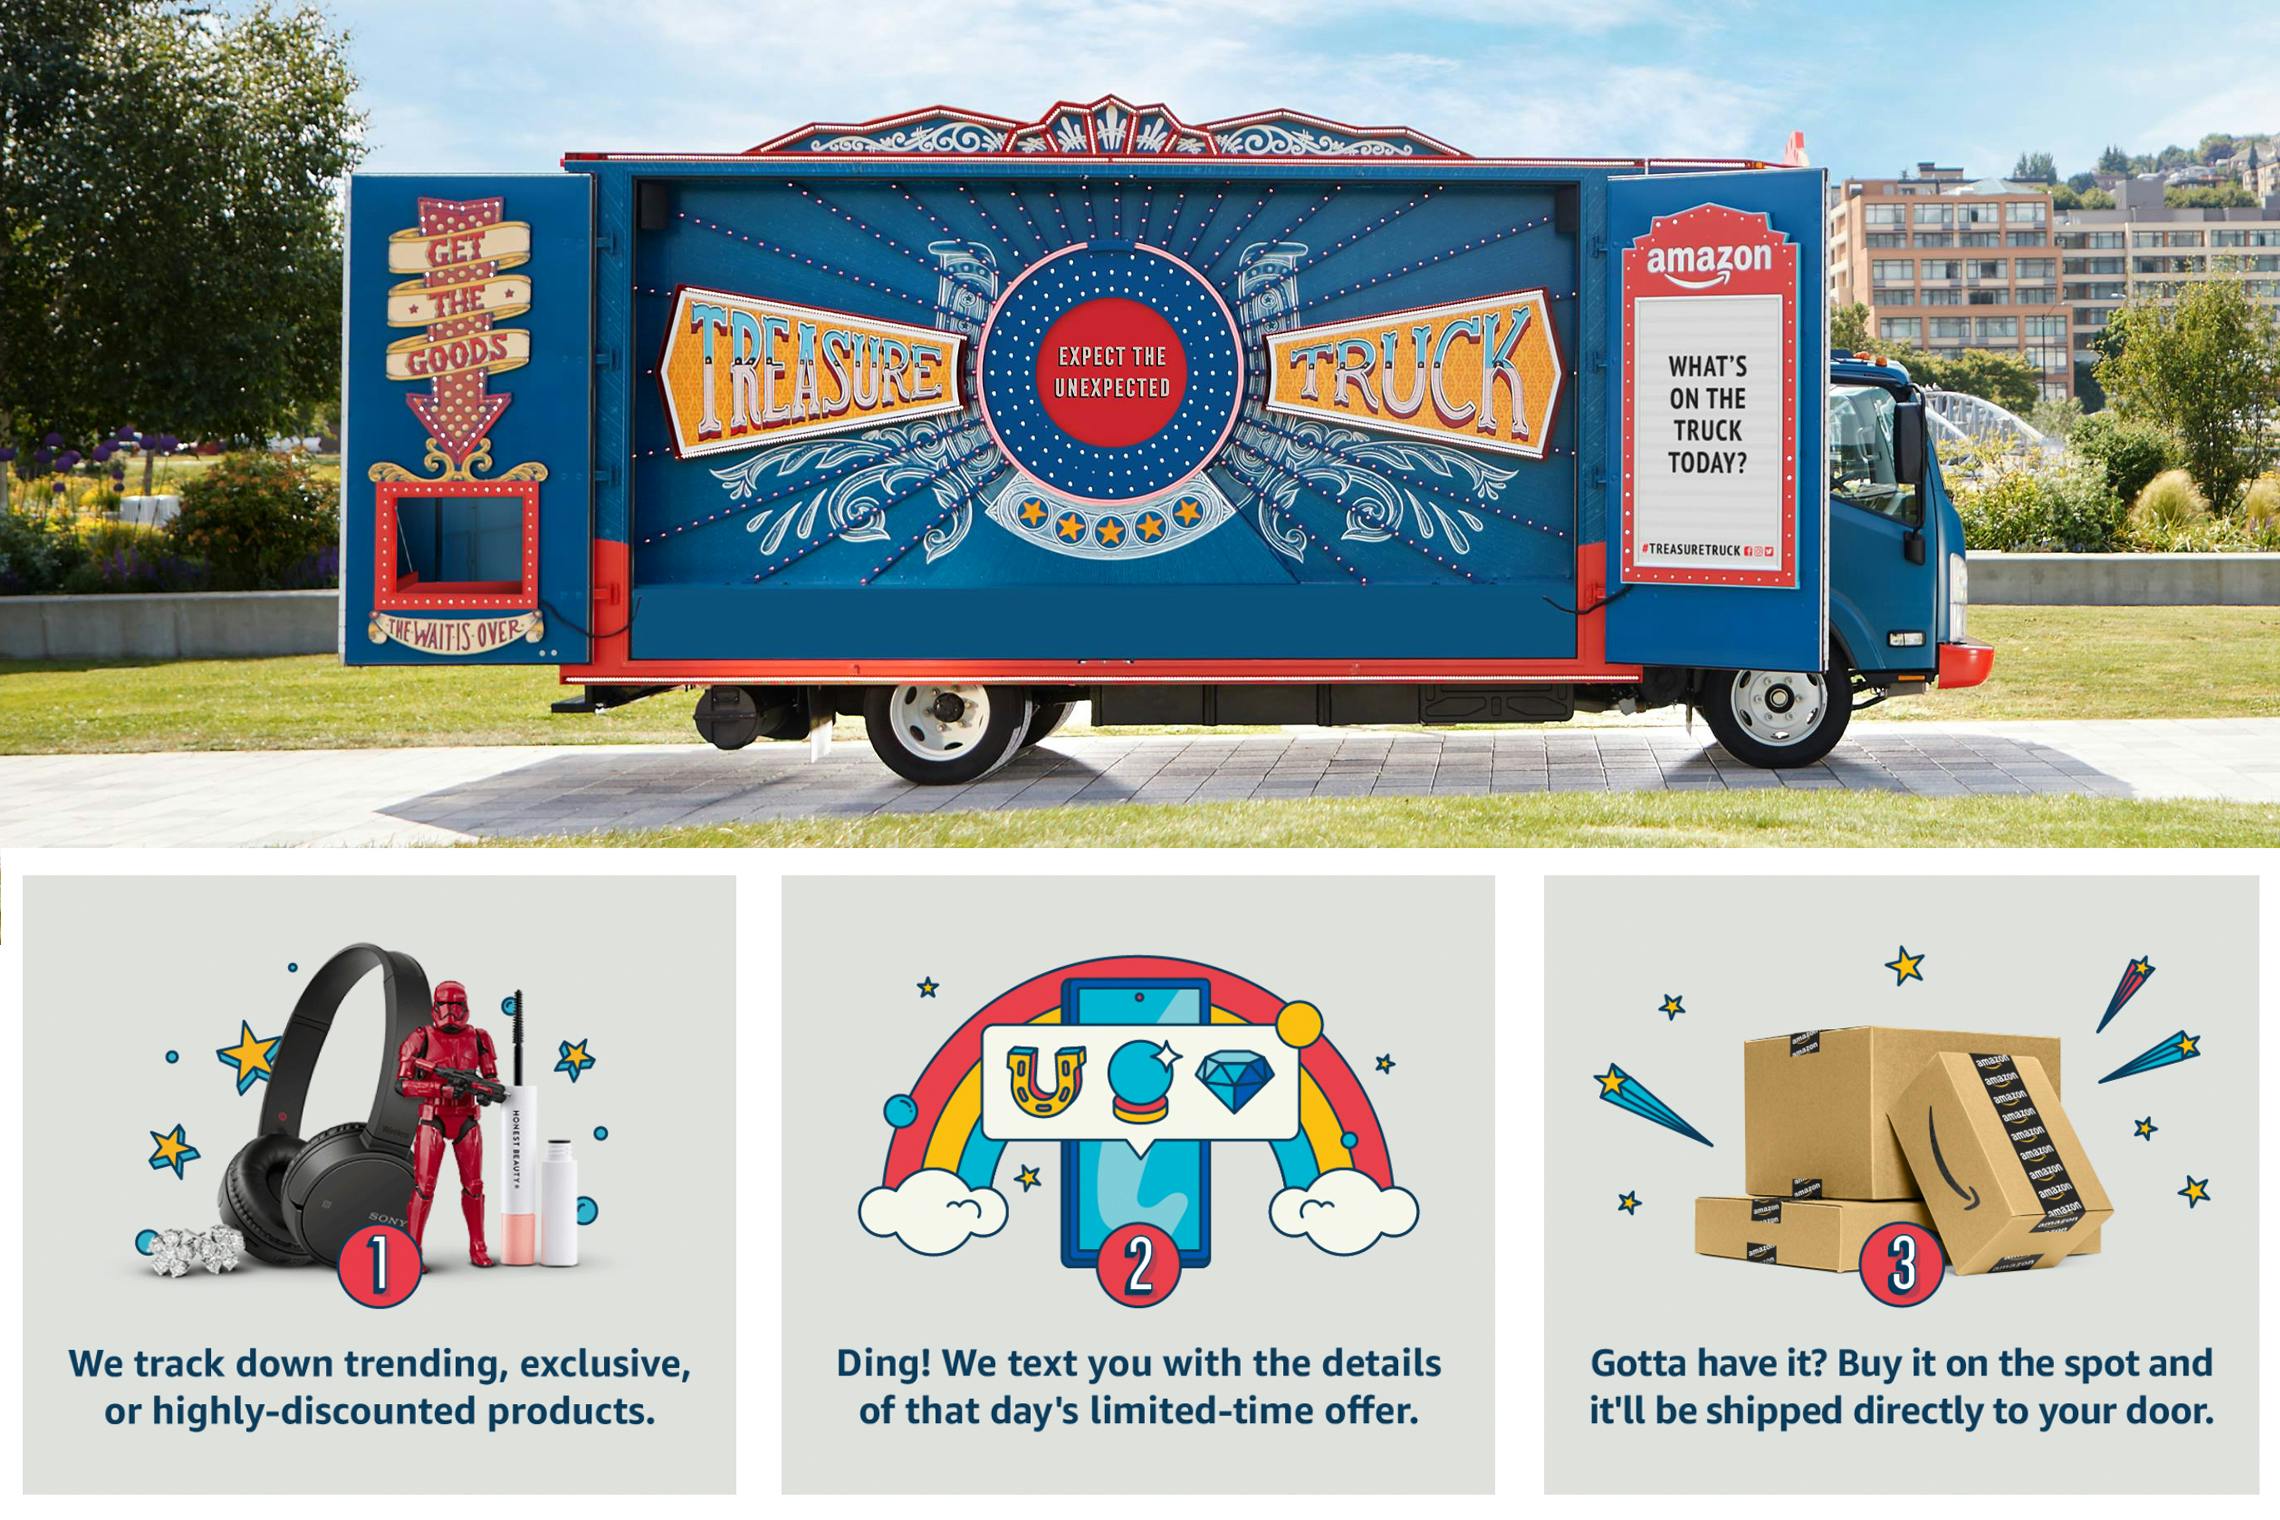 Amazon treasure truck and cartoon drawings of how it works.